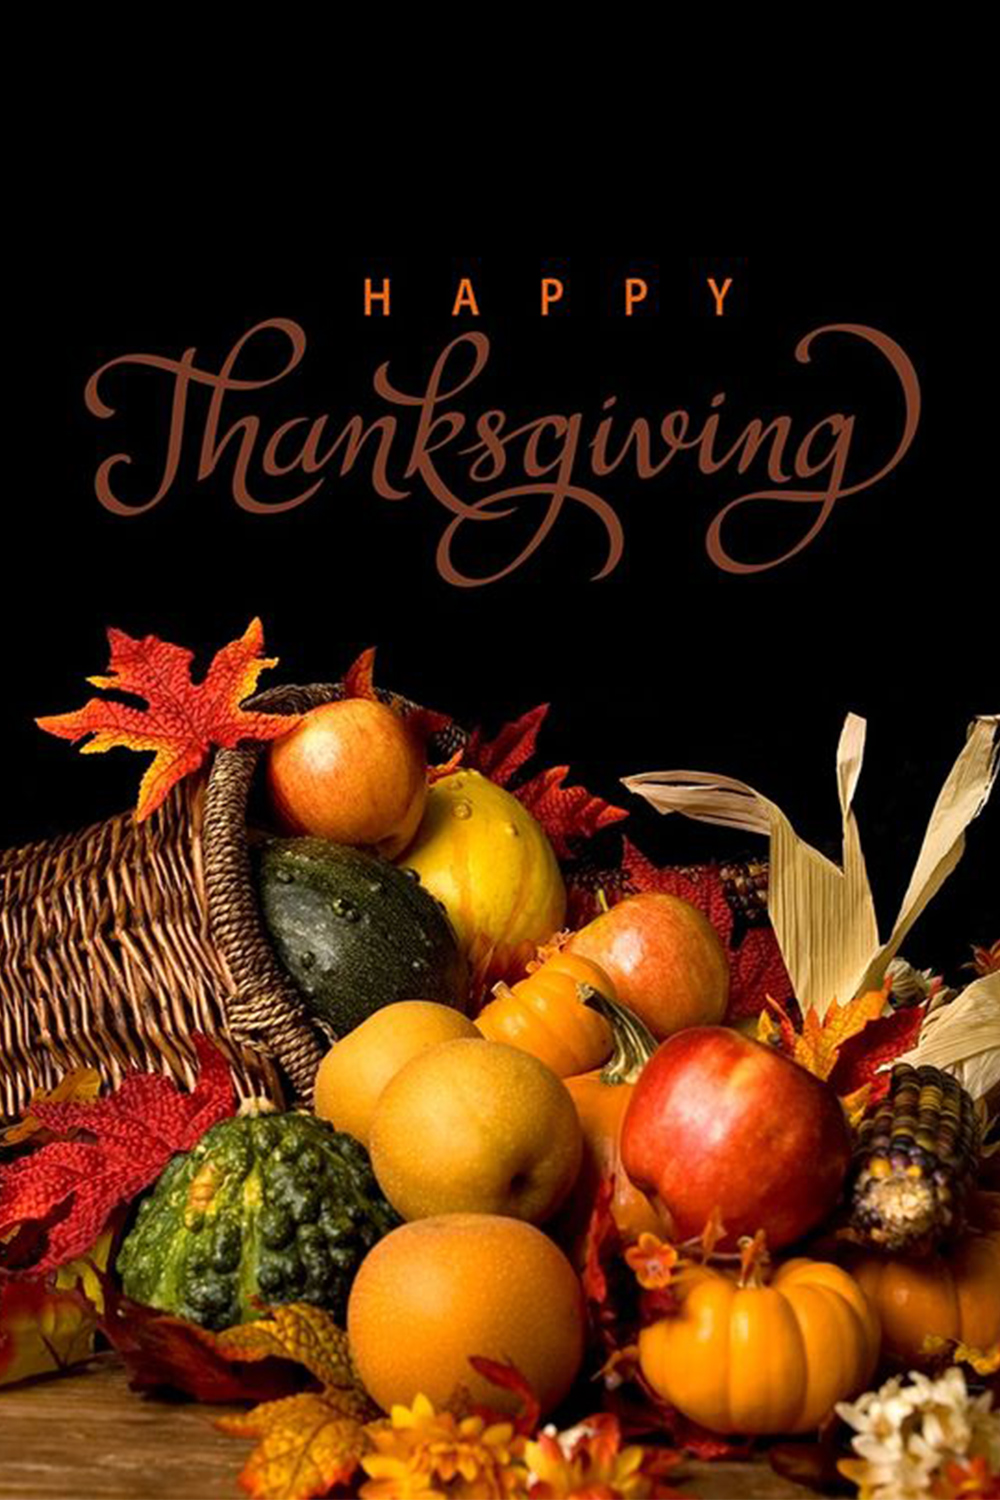 Happy Thanksgiving Day 2022 in America from PMA Group